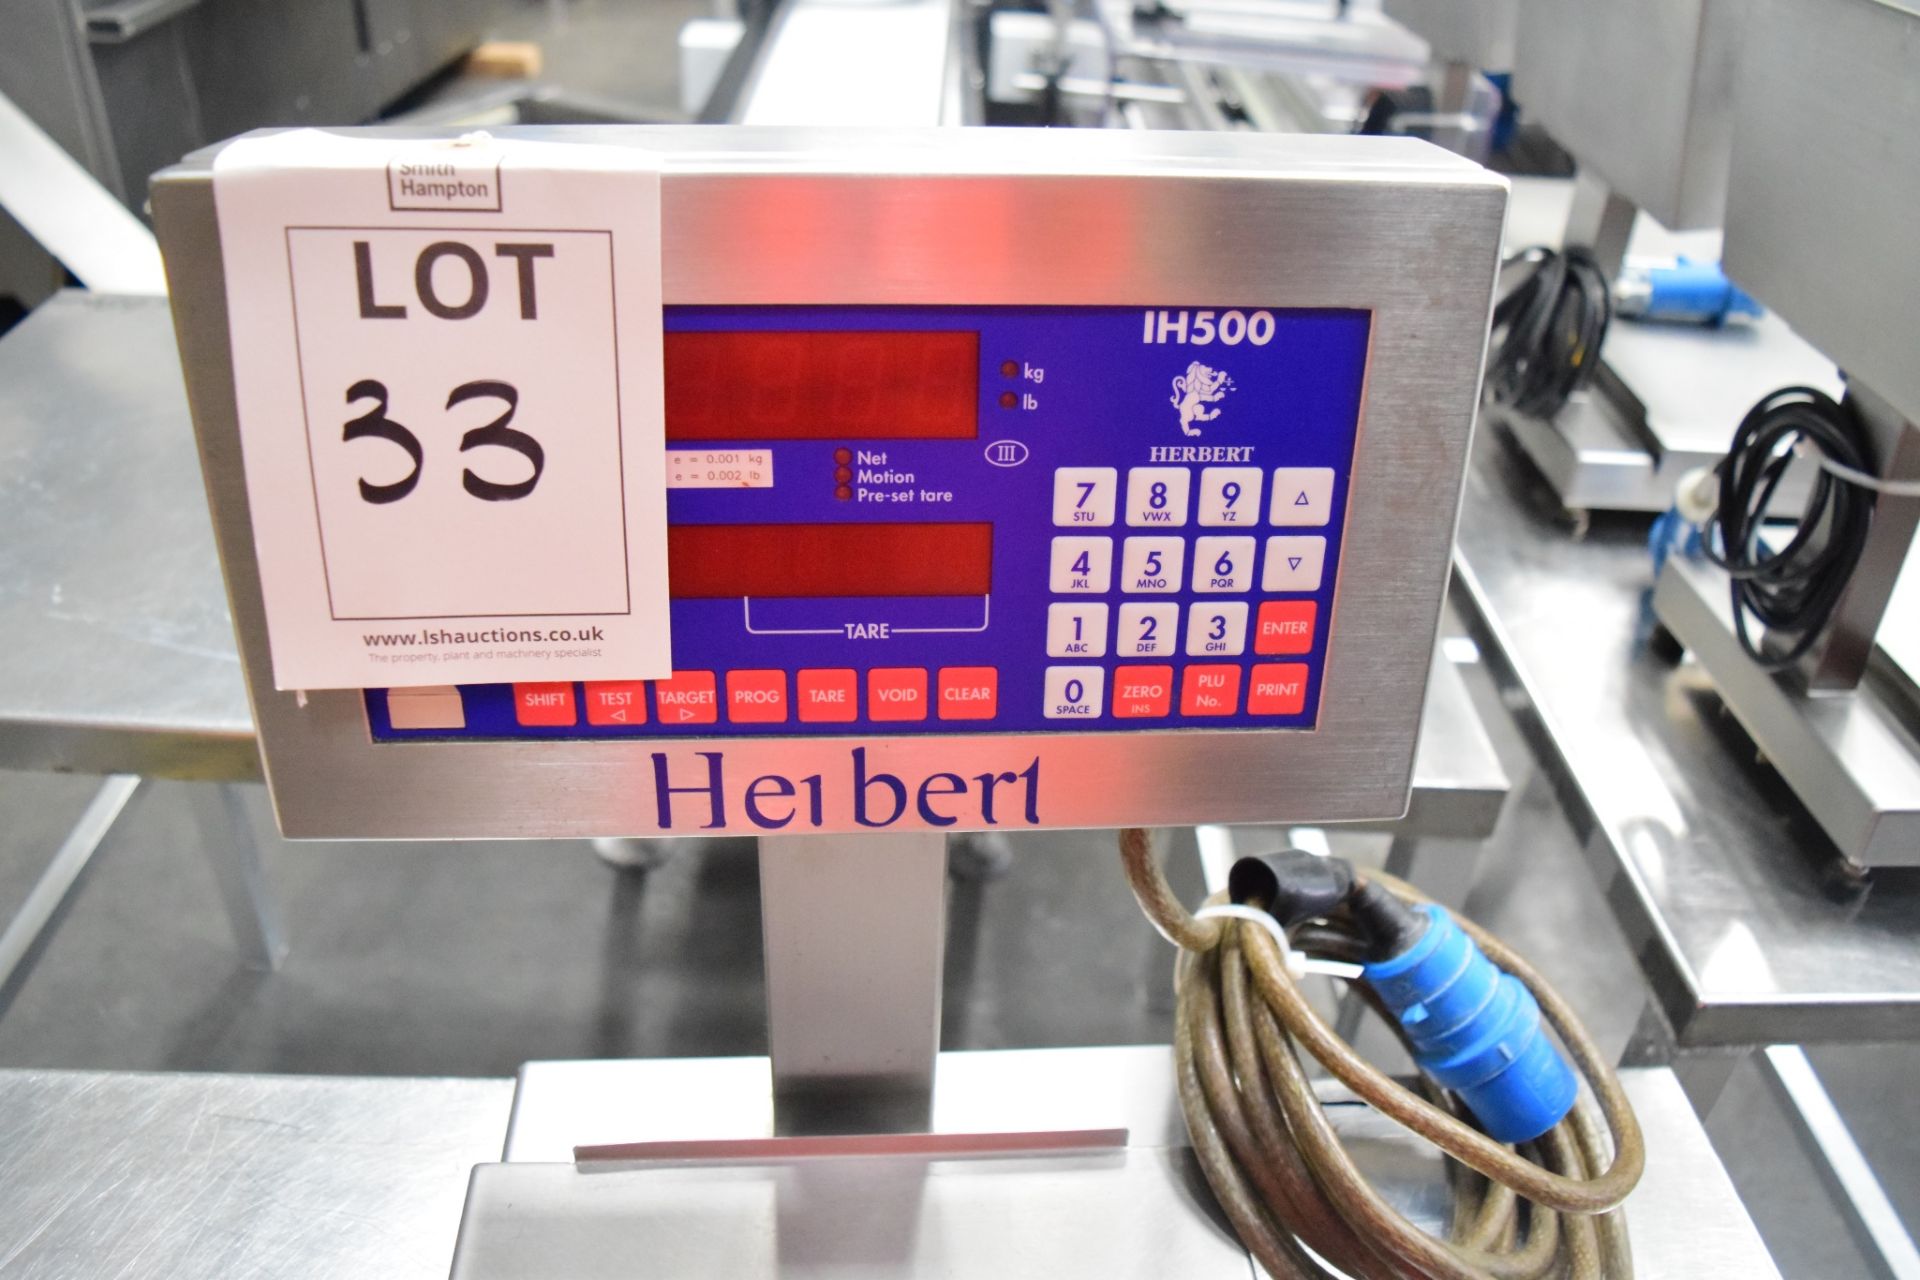 Herbert IH500 scale, table top, single phase, 2002 year, platform size: 270 x 220, overall